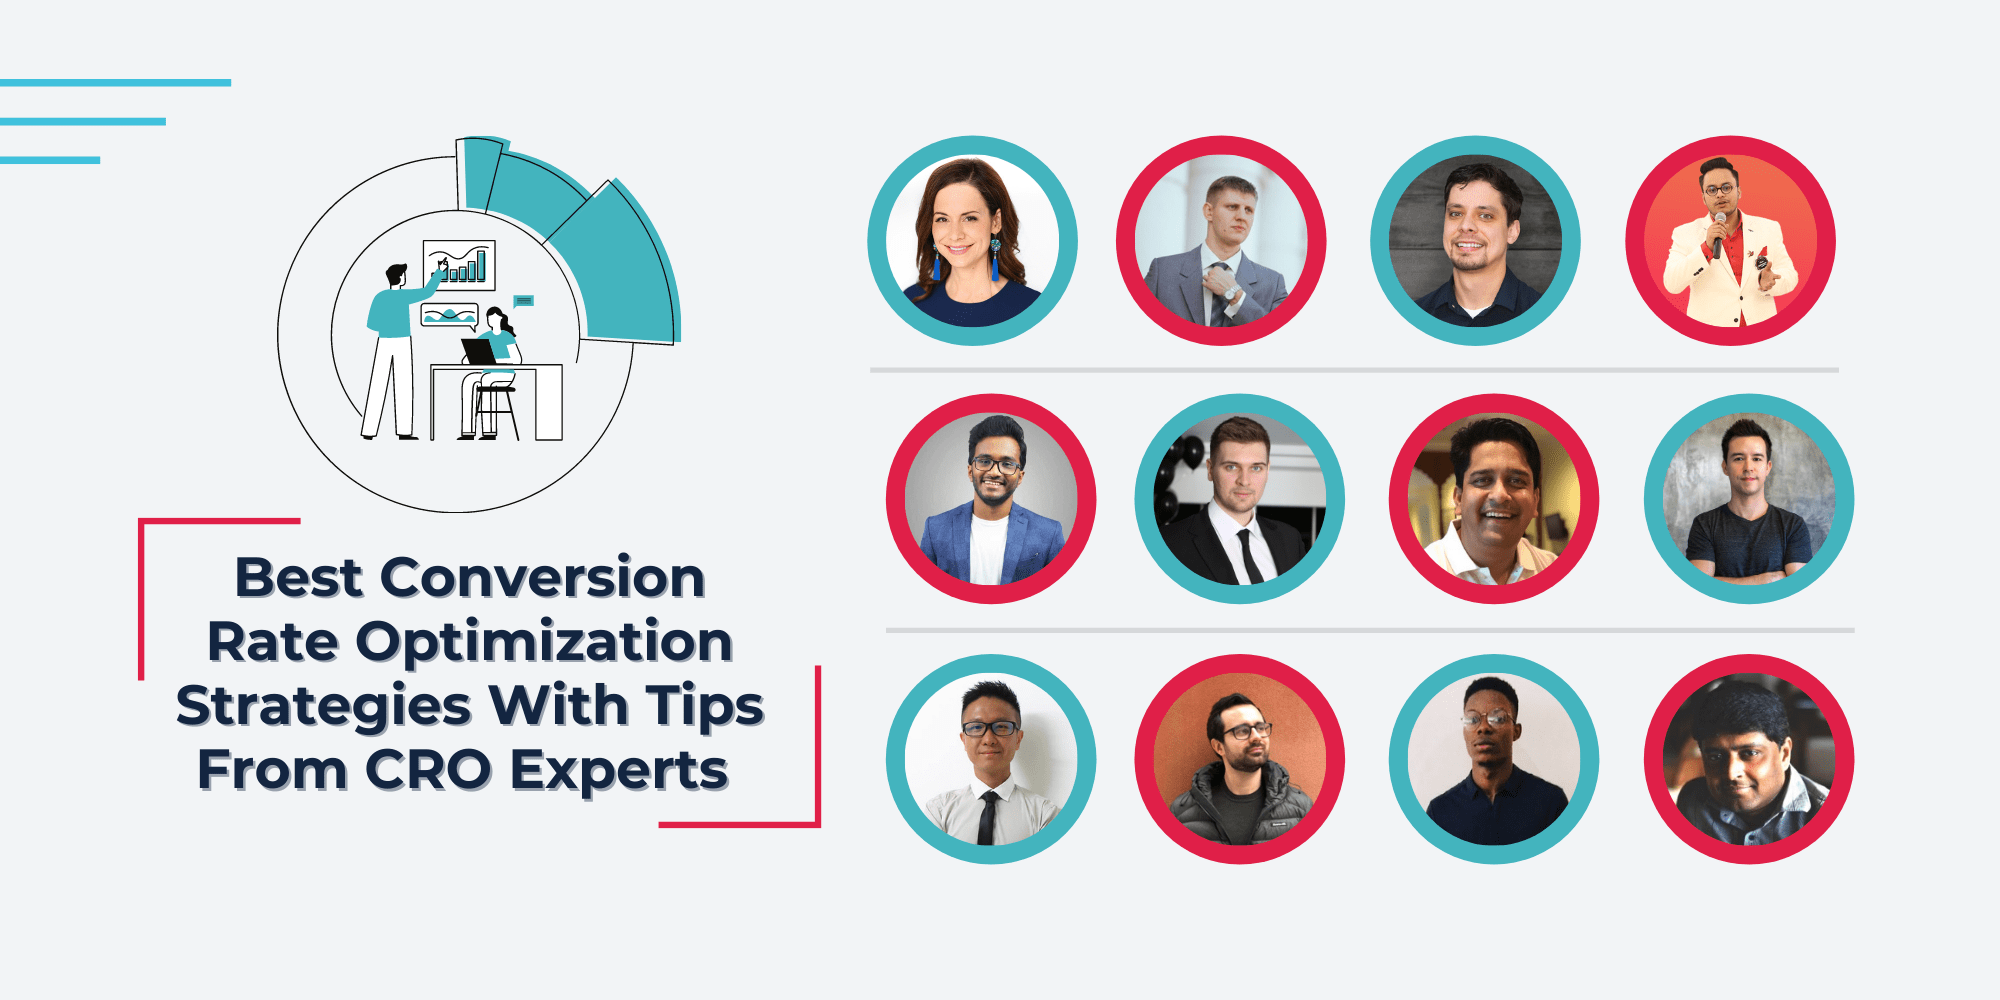 Best Conversion Rate Optimization Strategies With Tips From CRO Experts